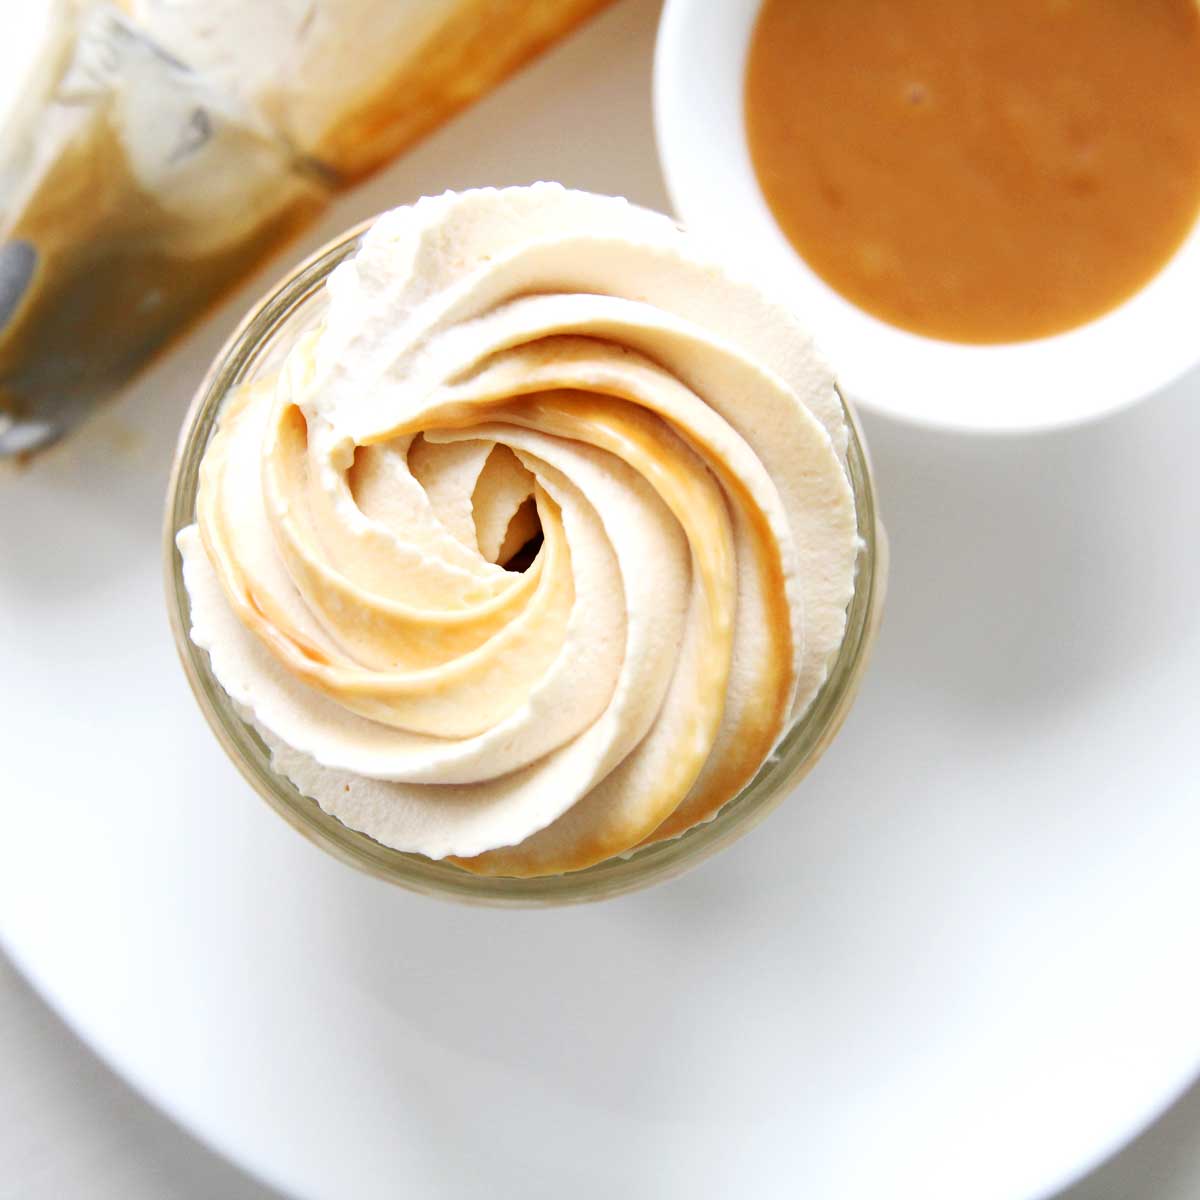 Swirled Caramel Whipped Cream Recipe Perfect for Coffee, Cakes and More - Brown Sugar Whipped Cream